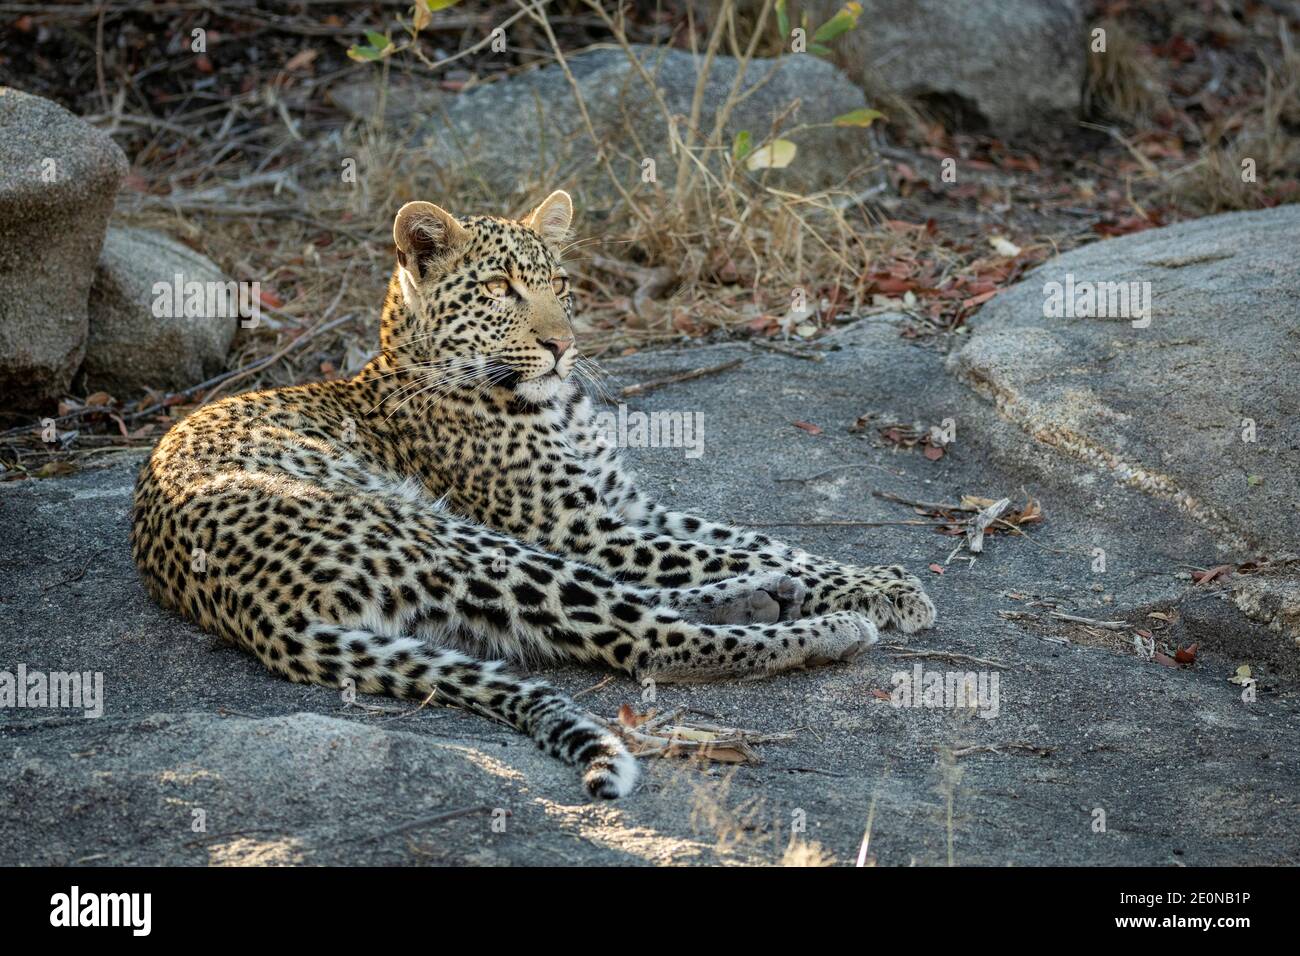 Leopard with big whiskers and beautiful eyes resting on a large rock looking alert in Kruger Park in South Africa Stock Photo